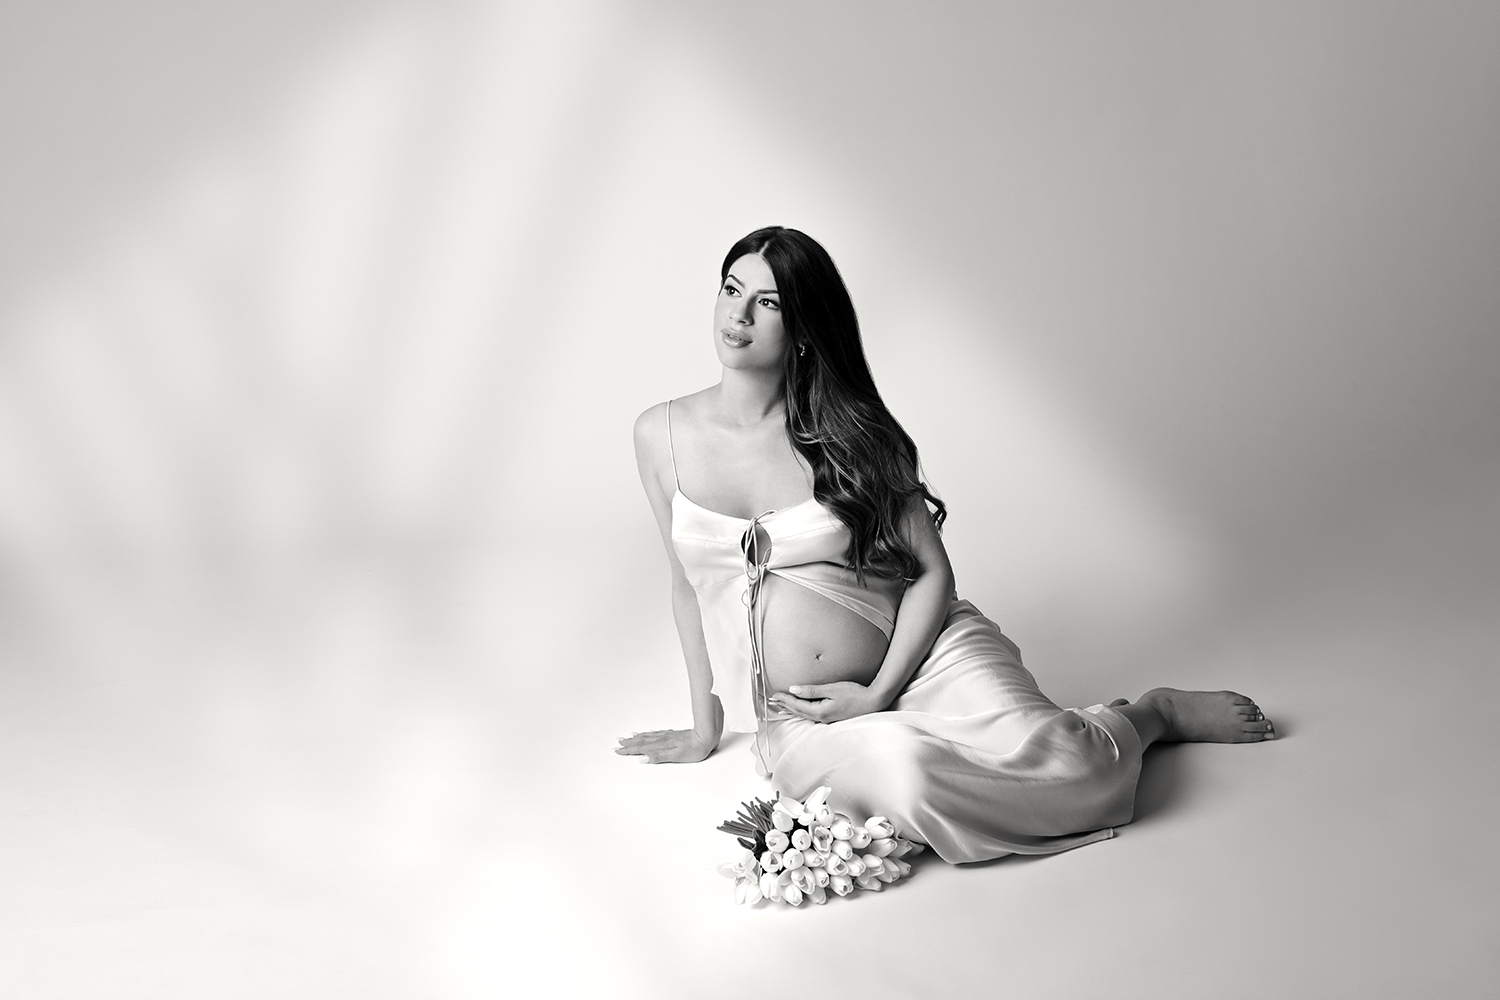 A maternity photo session featuring a woman draped in luxurious fabrics and fitting on the ground